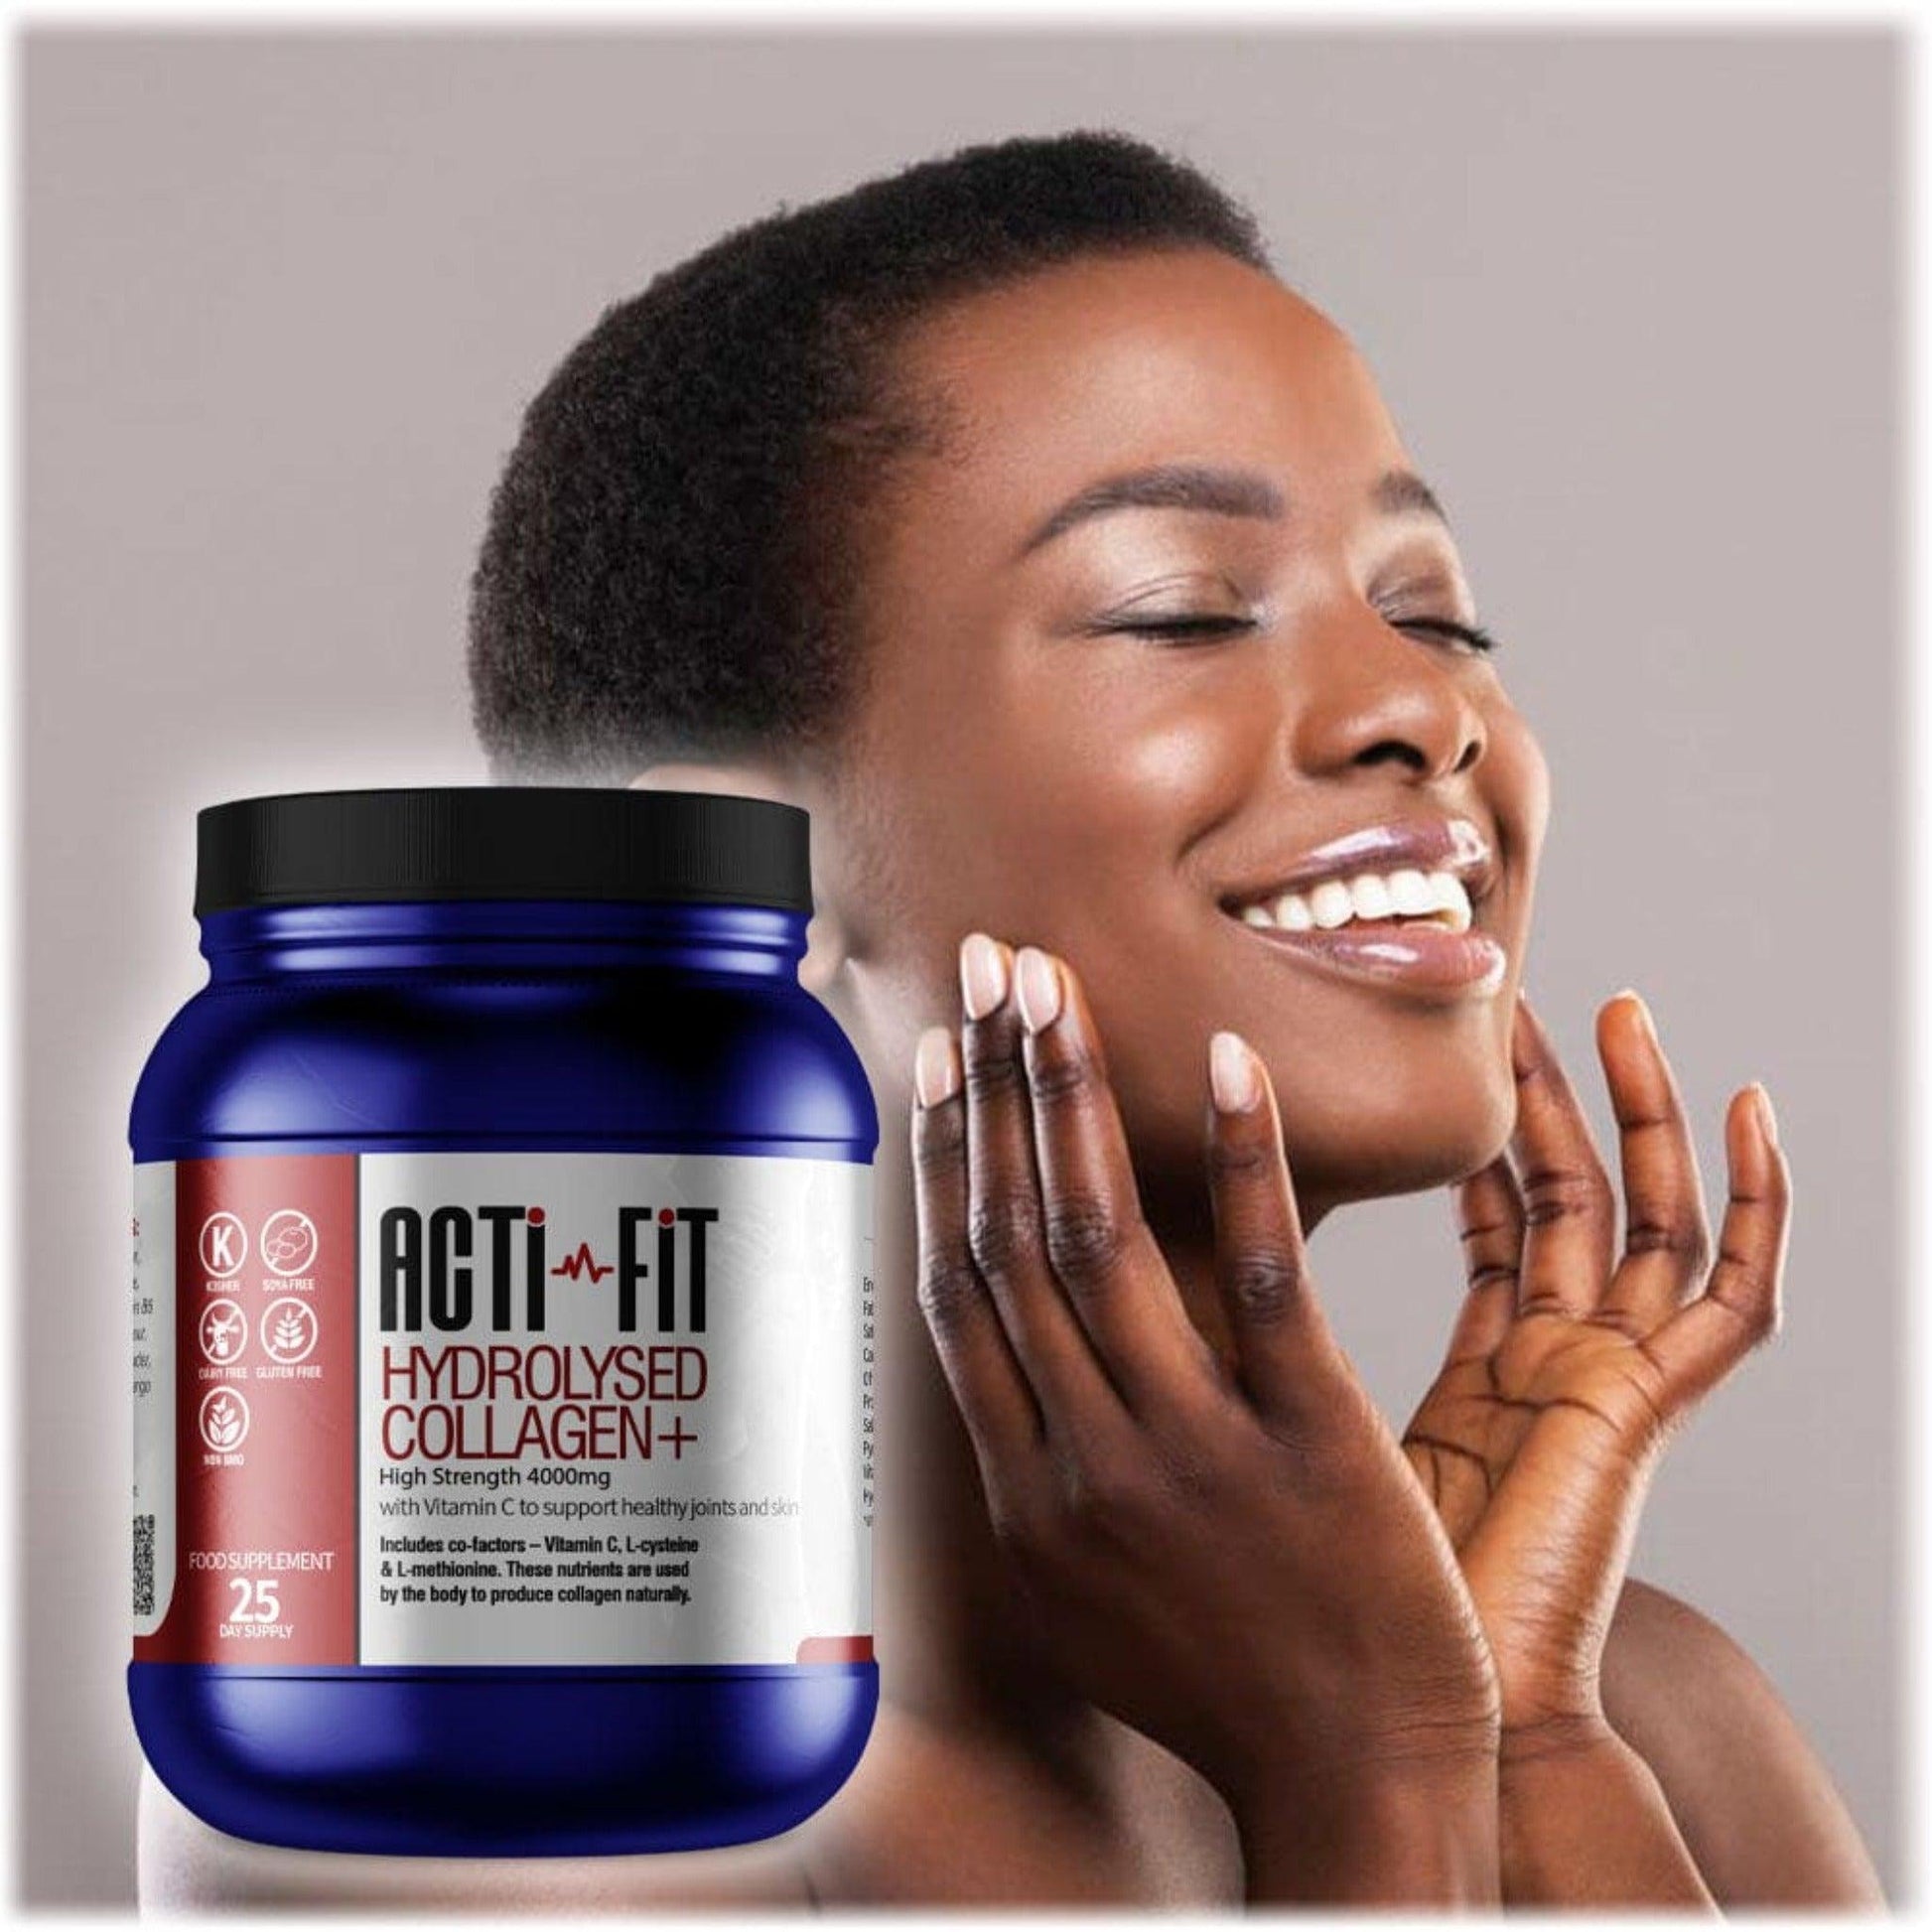 A woman holding her face with a tub of Acti-Fit Hydrolysed Collagen 4000mg in the foreground